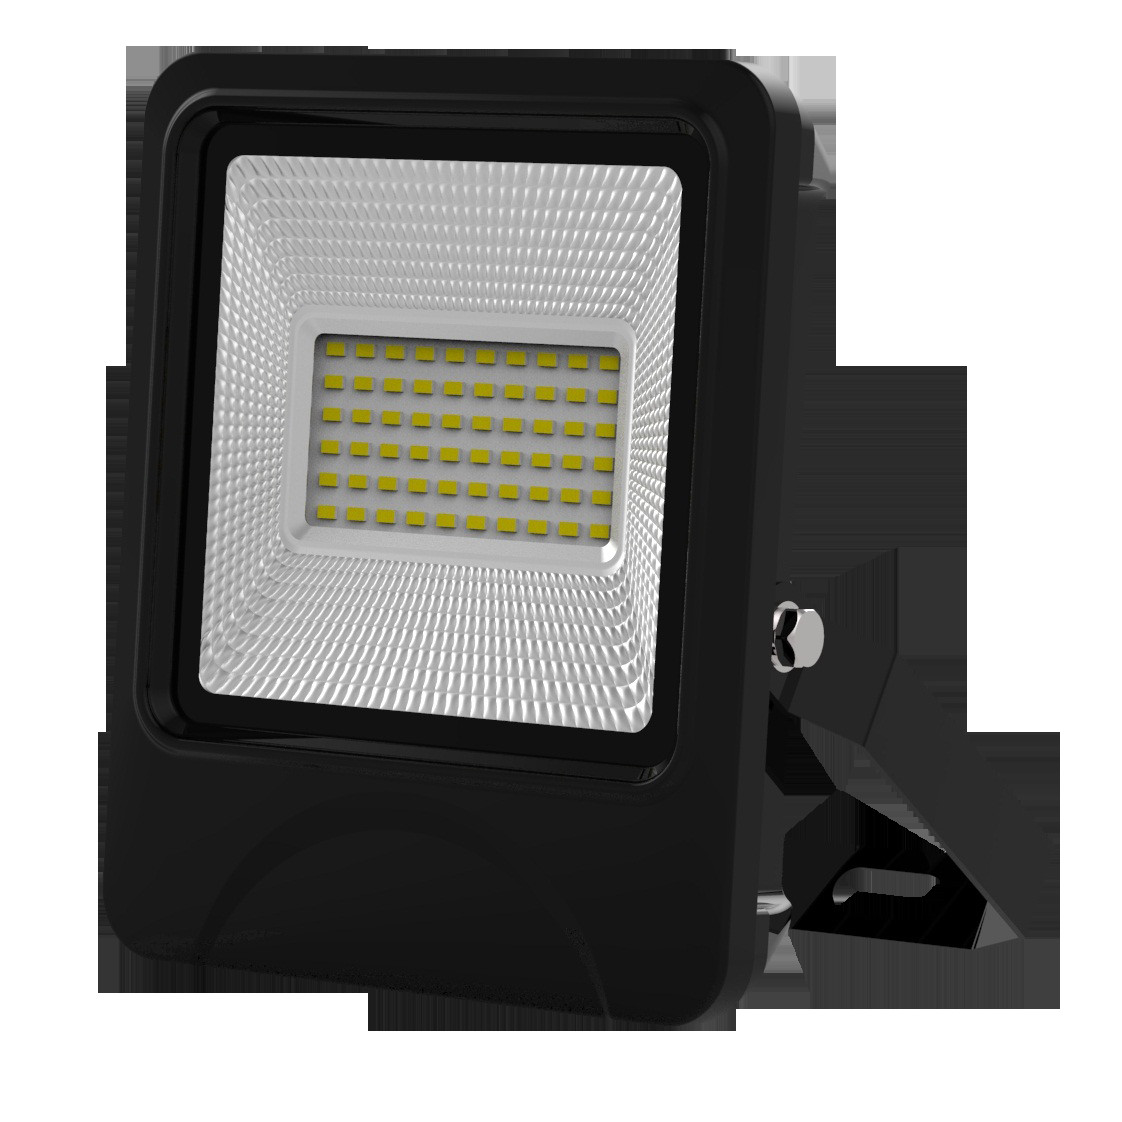 Quality outdoor lighting lamp flood light led 30W 60pcs SD5730 IP66 isolated IC driver black fixture new slim integrated design for sale